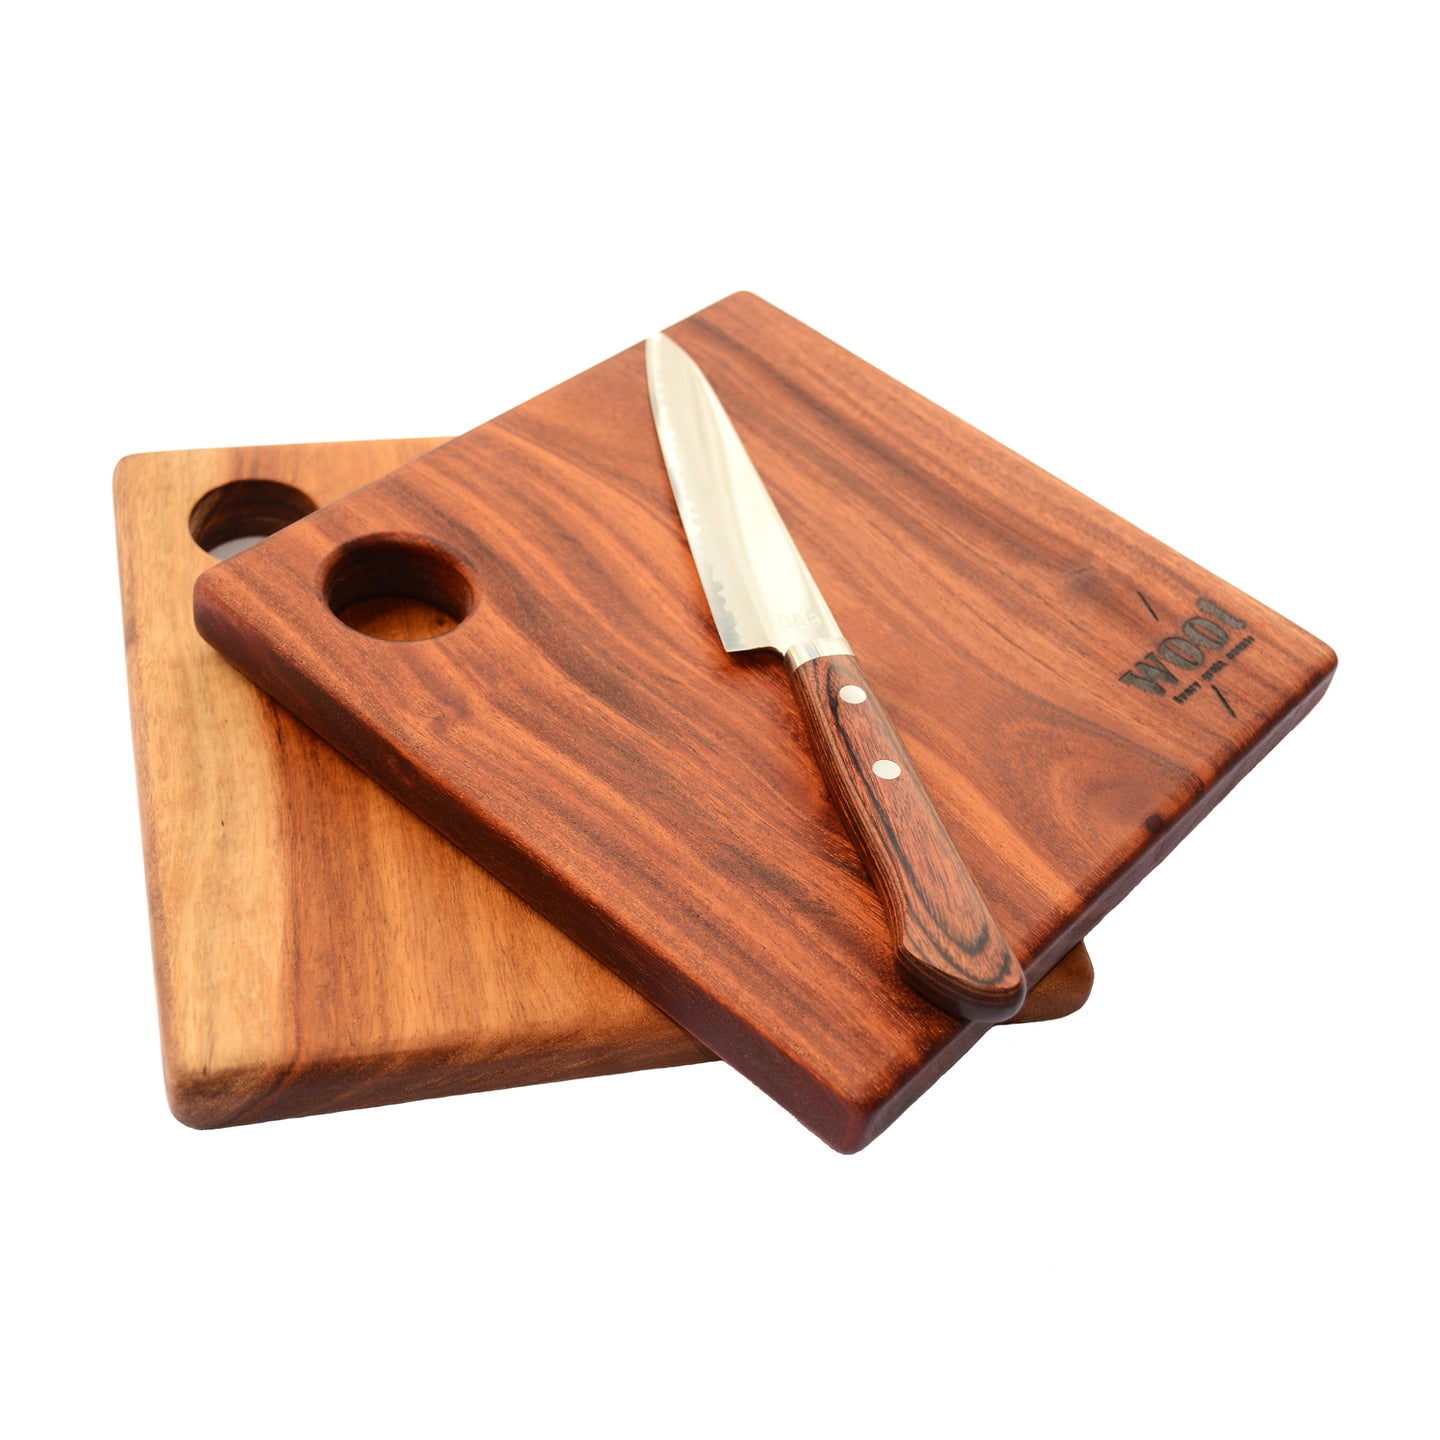 Serving Board - Small (Hole)